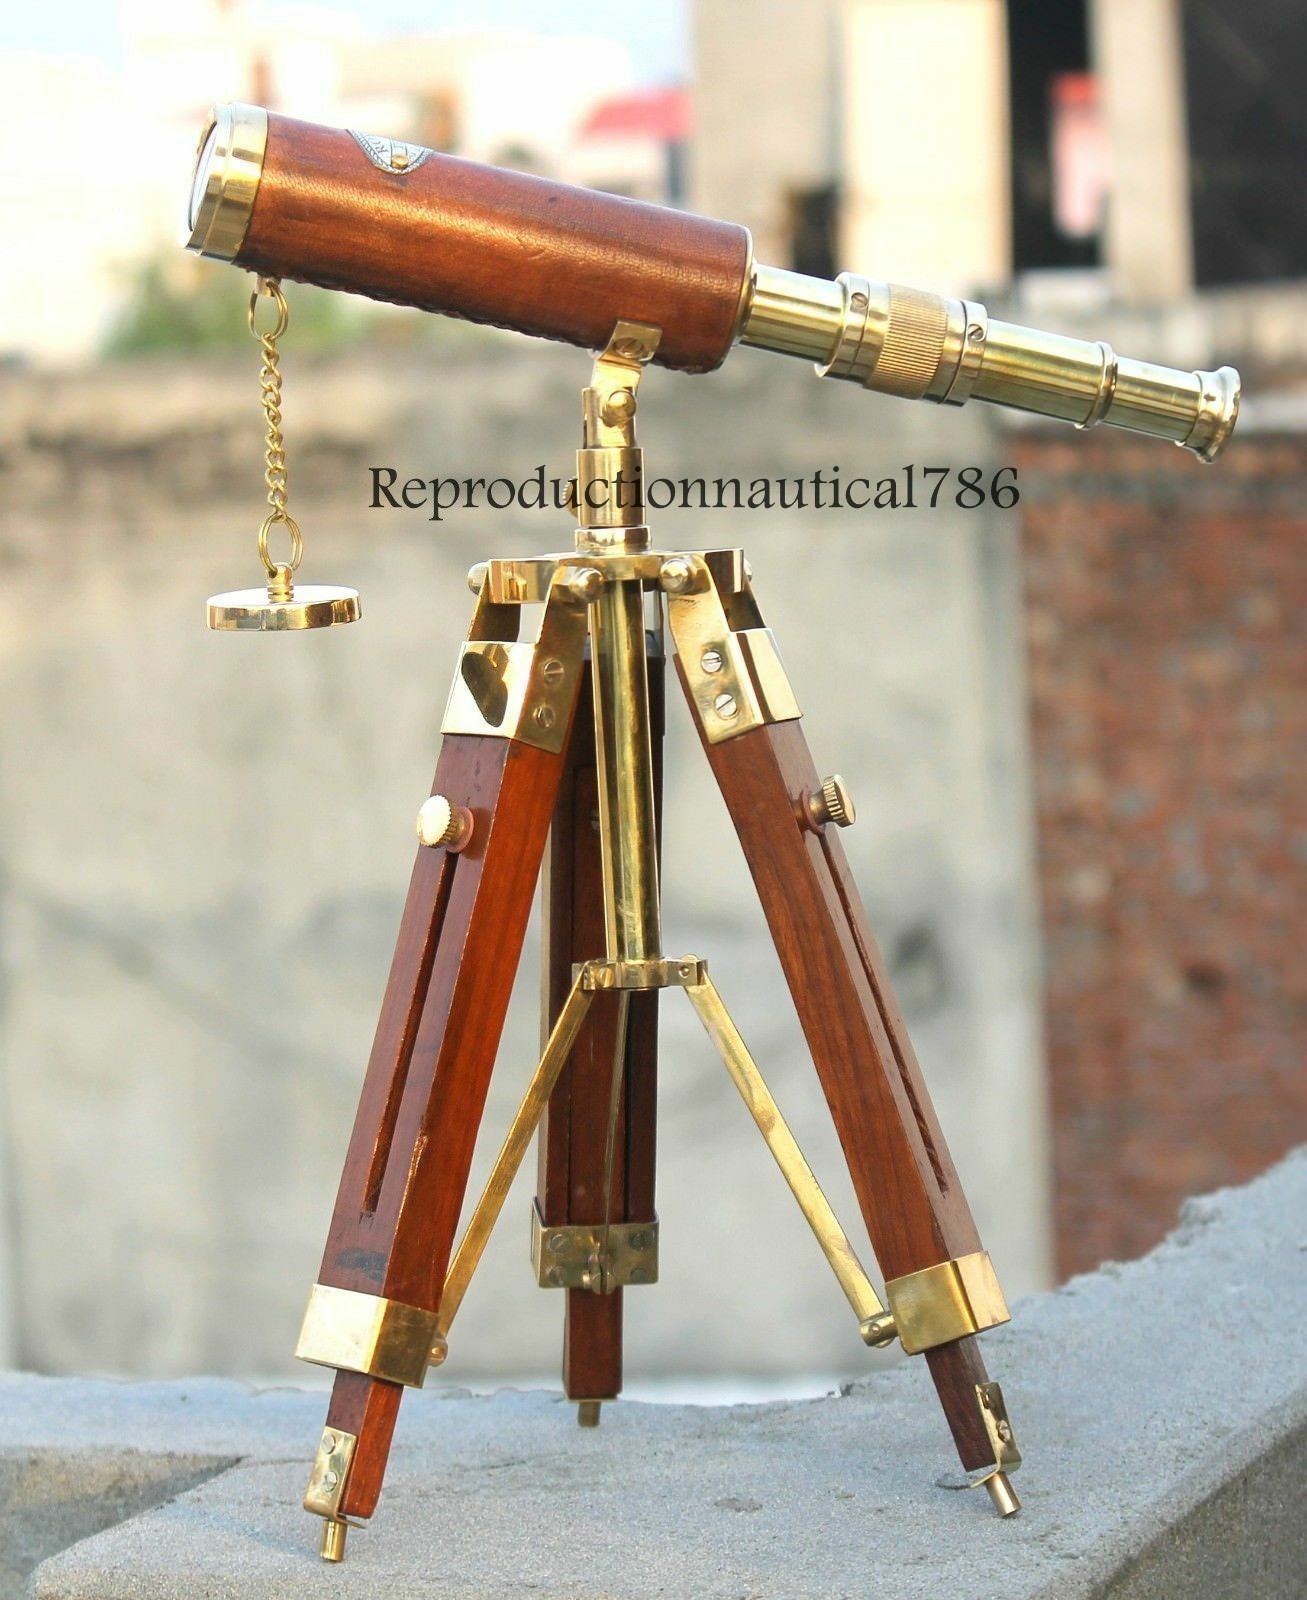 Royal Nautical Chrome Finished Telescope Spyglass With Wooden Tripod Stand Home Decor Gift 